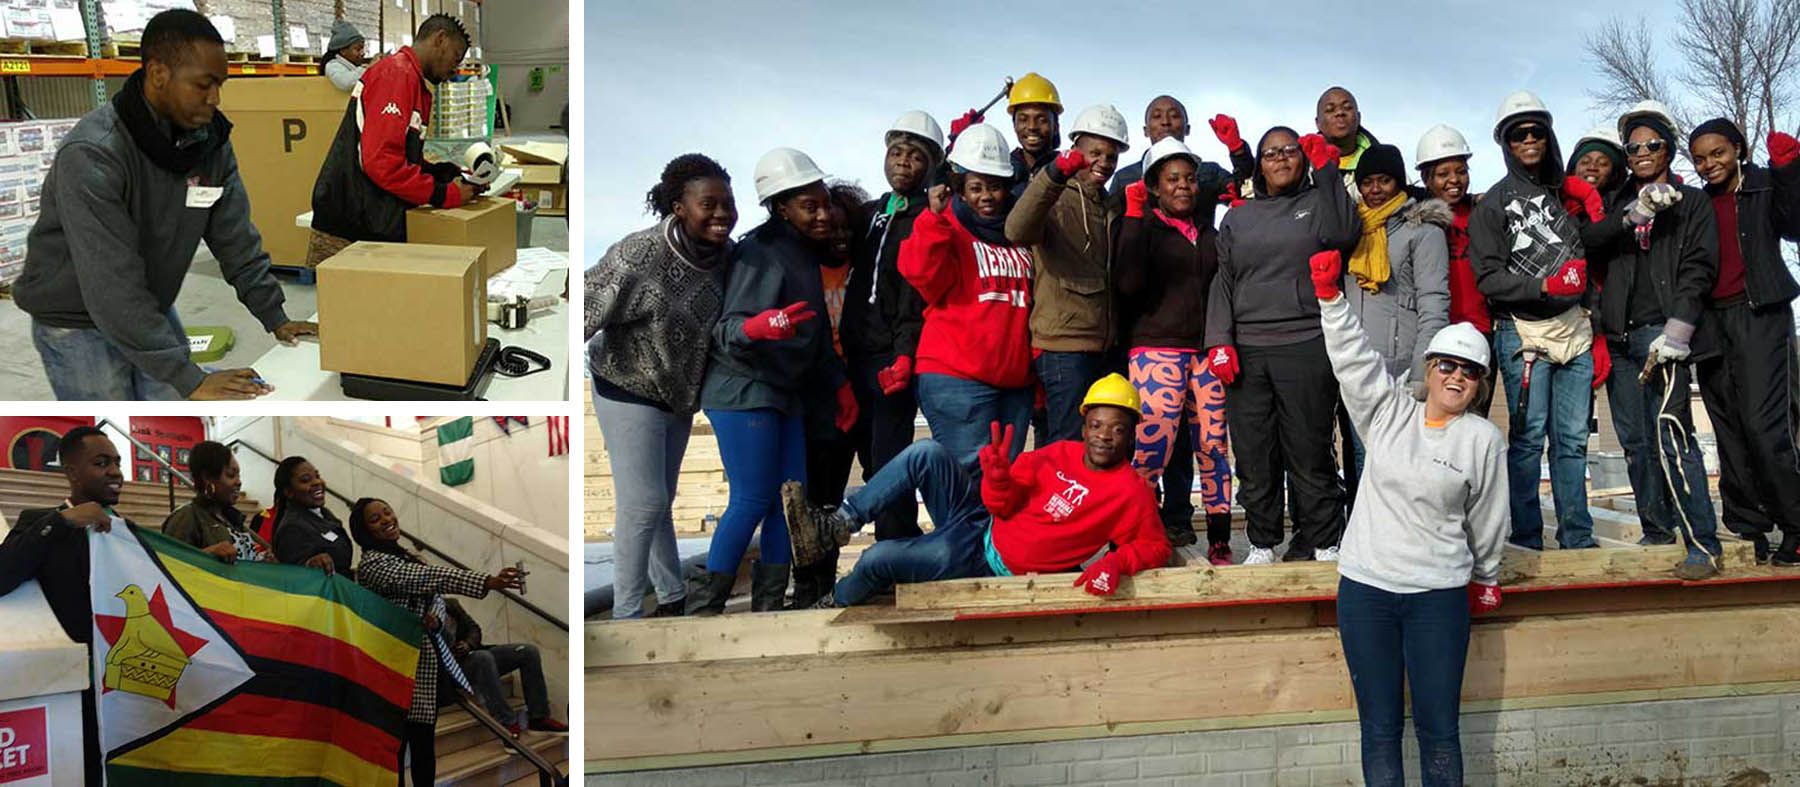 SUSI students from Africa participate in volunteer projects for Habitat for Humanity and a food bank